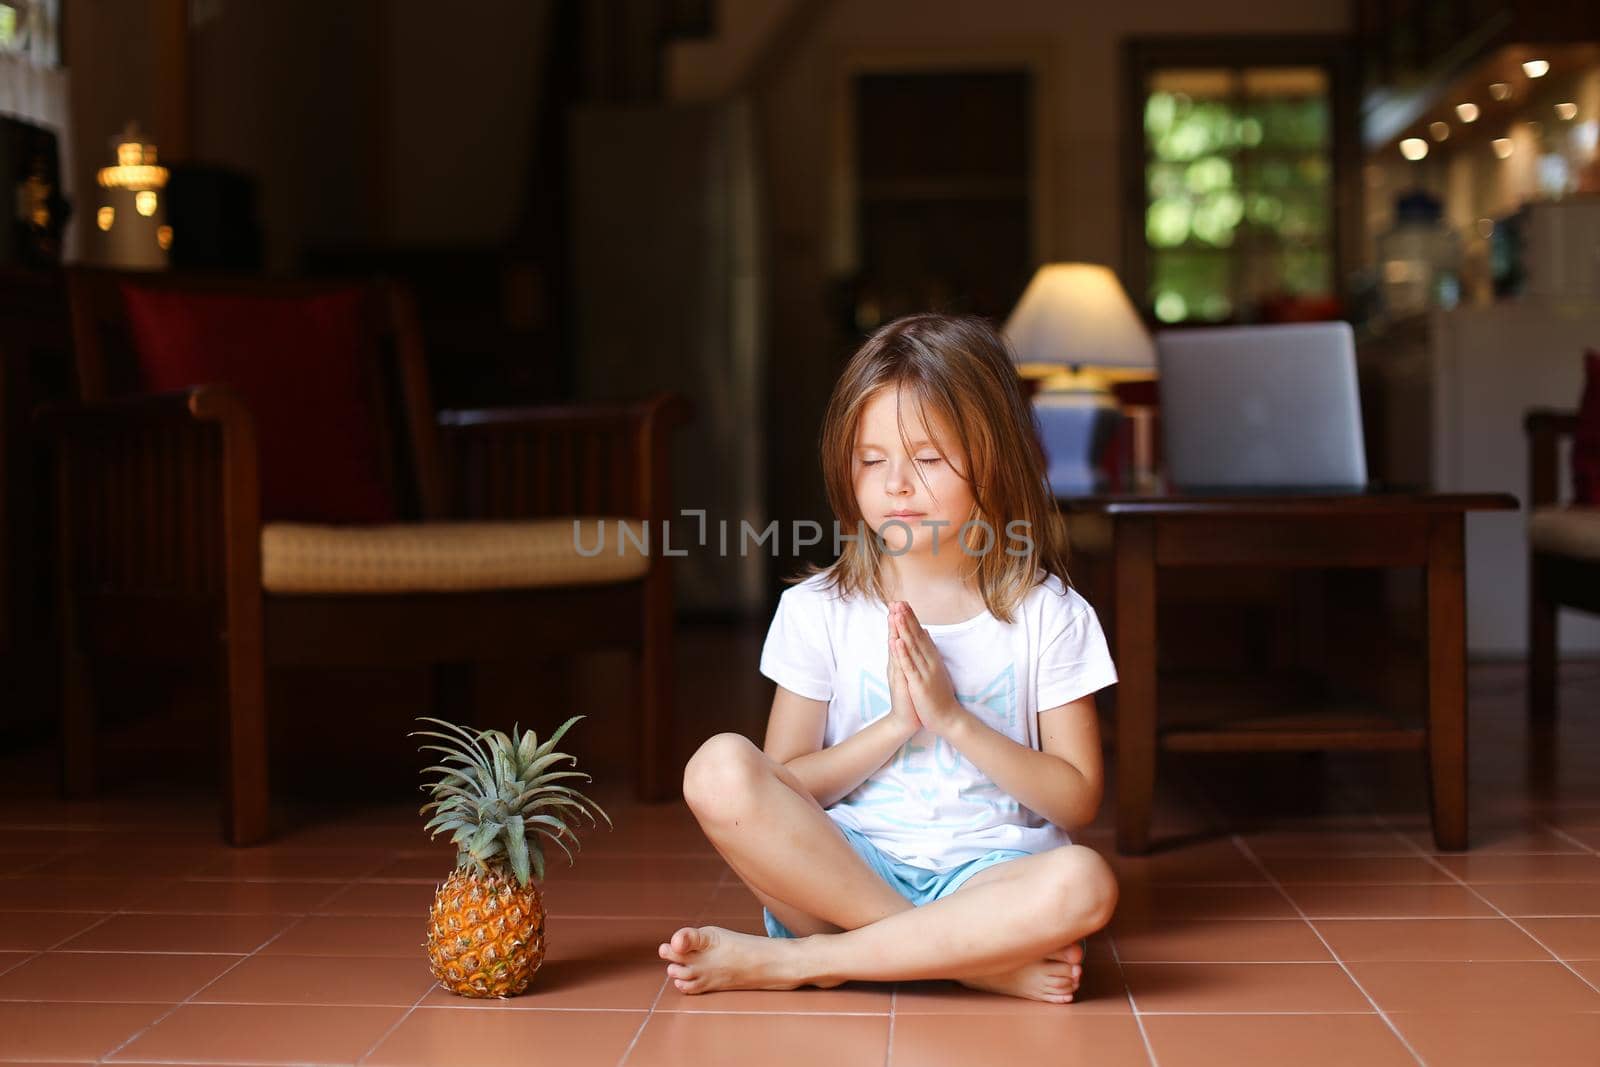 Little girl sitting on floor with pineapple and meditating. by sisterspro